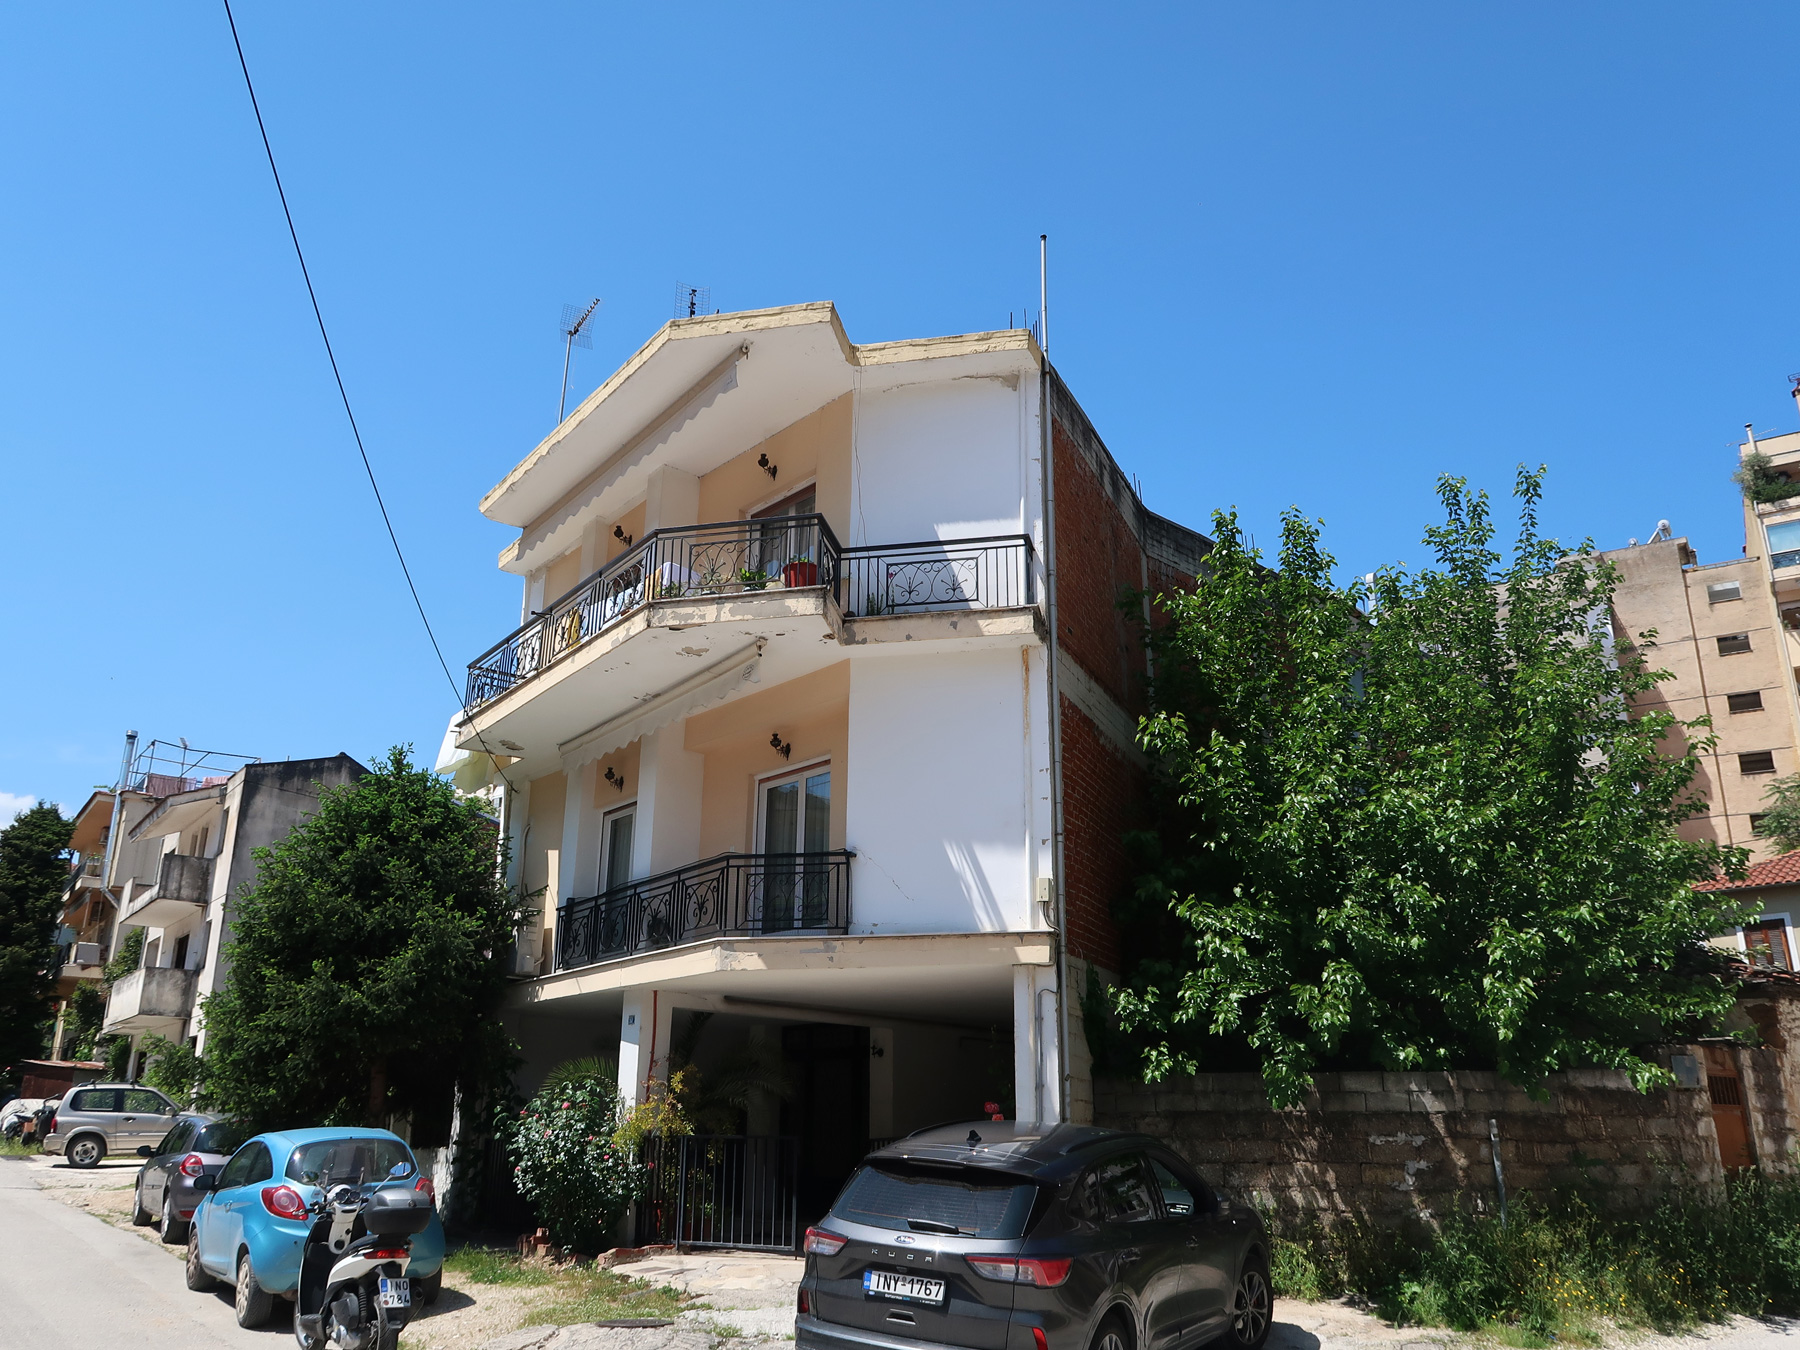 For sale 2 bedroom apartment of 143 sq.m. 2nd floor at Agiou Kosma in Ioannina